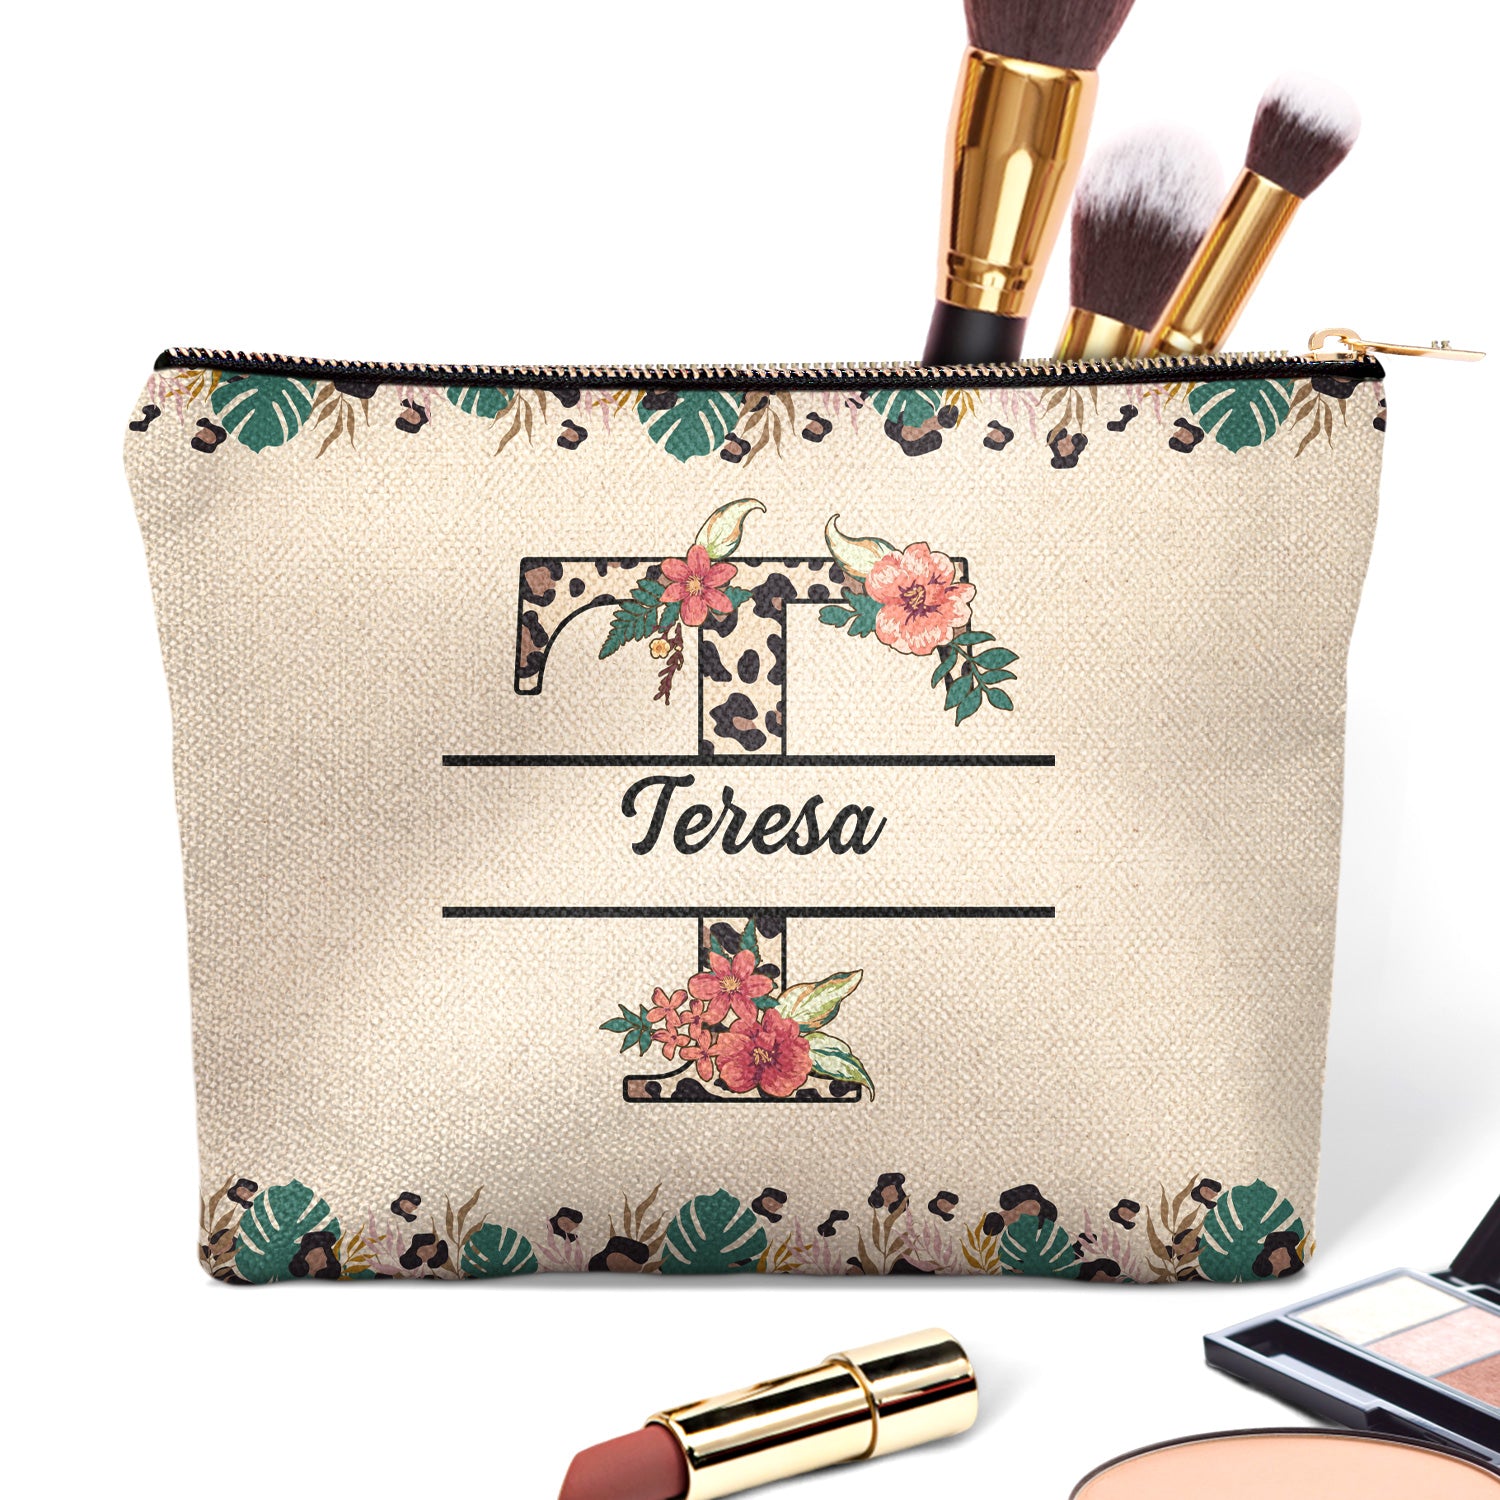 Monogram Letter Leopard Pattern - Gift For Women, Yourself - Personalized Cosmetic Bag